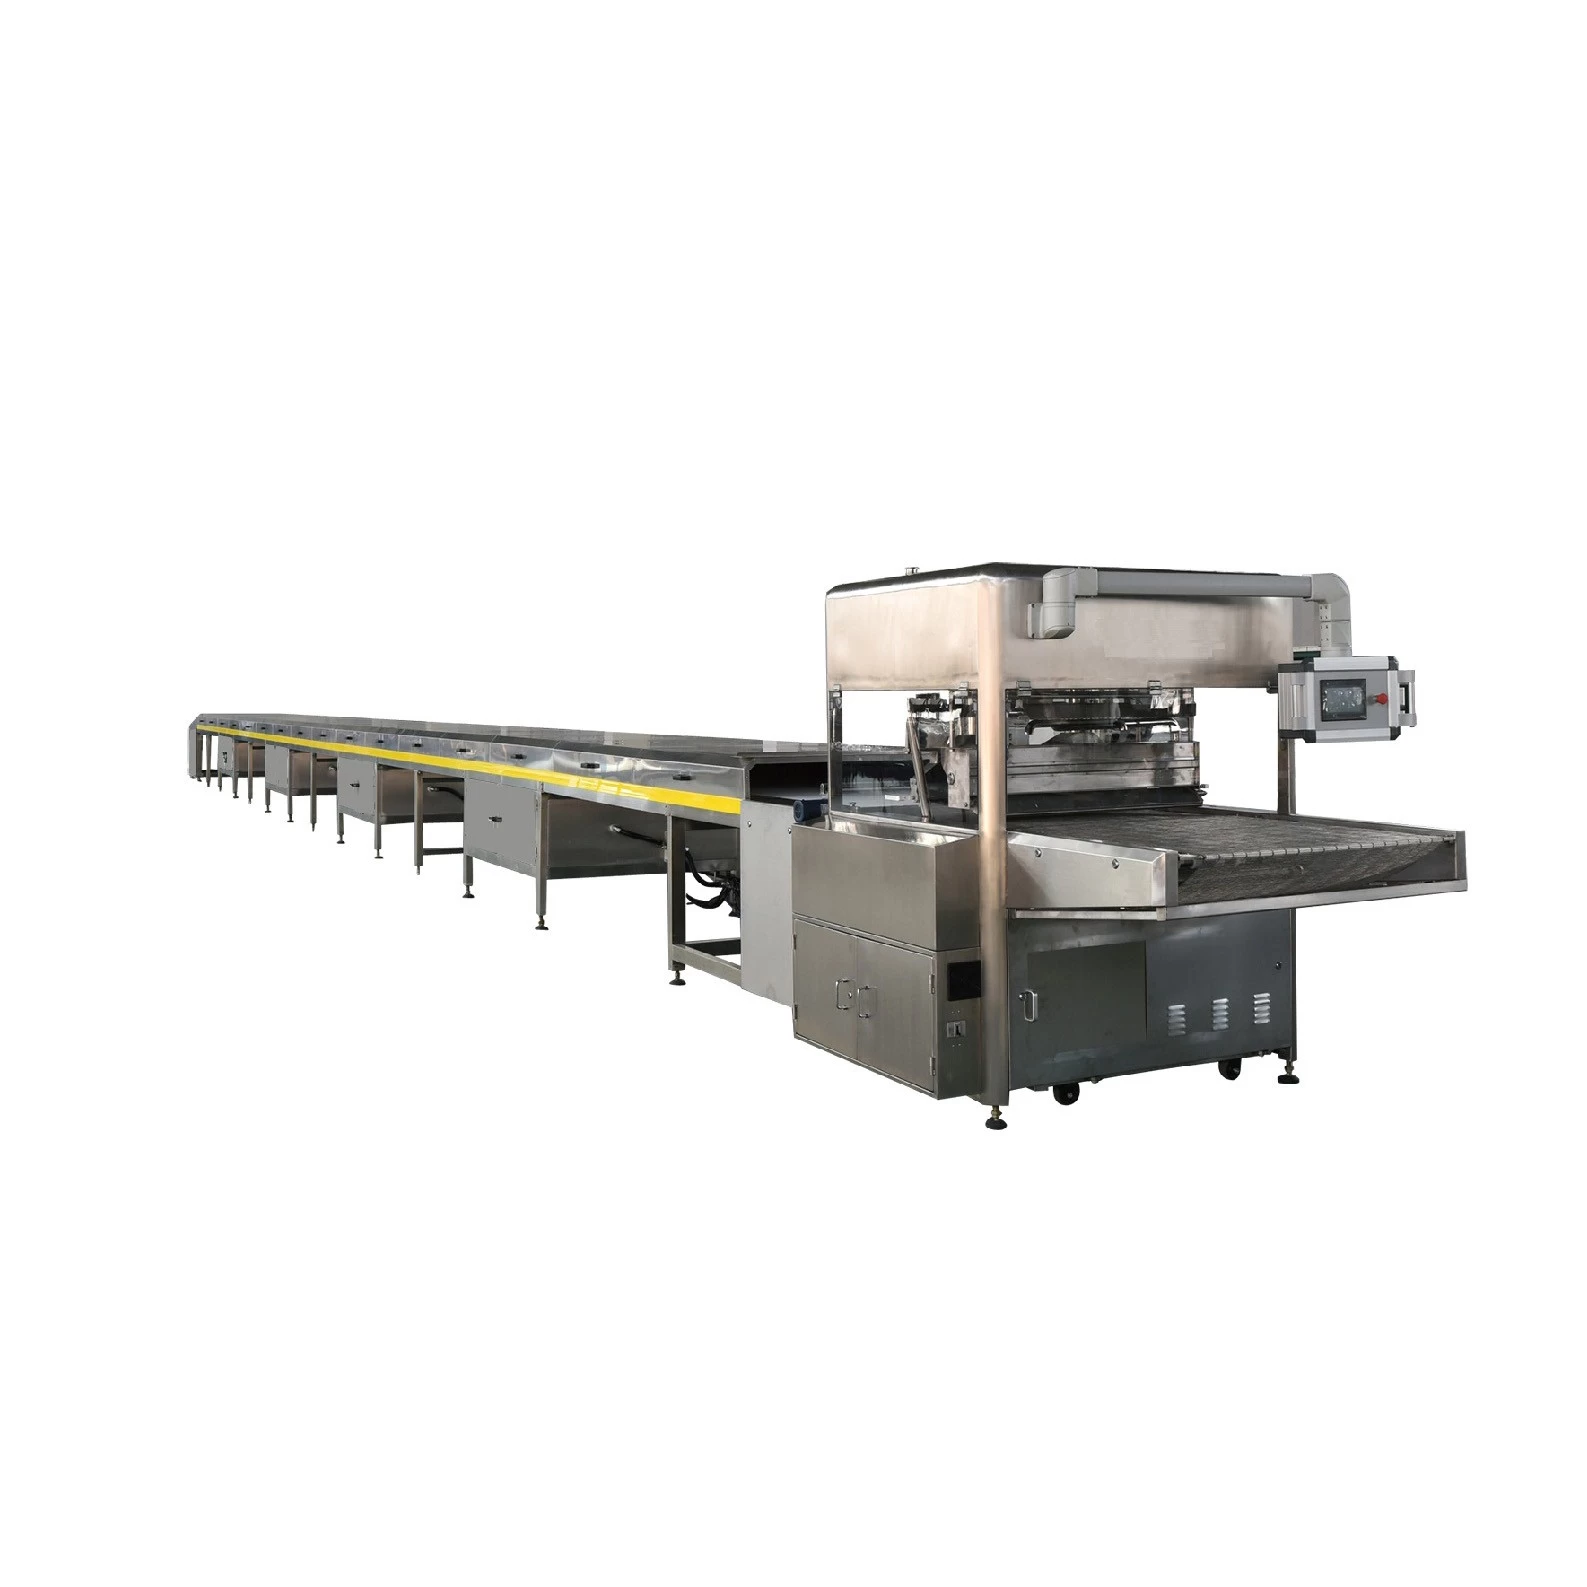 China mini chocolate enrobing coating machine small chocolate making line for bar wafers biscuit production manufacturer